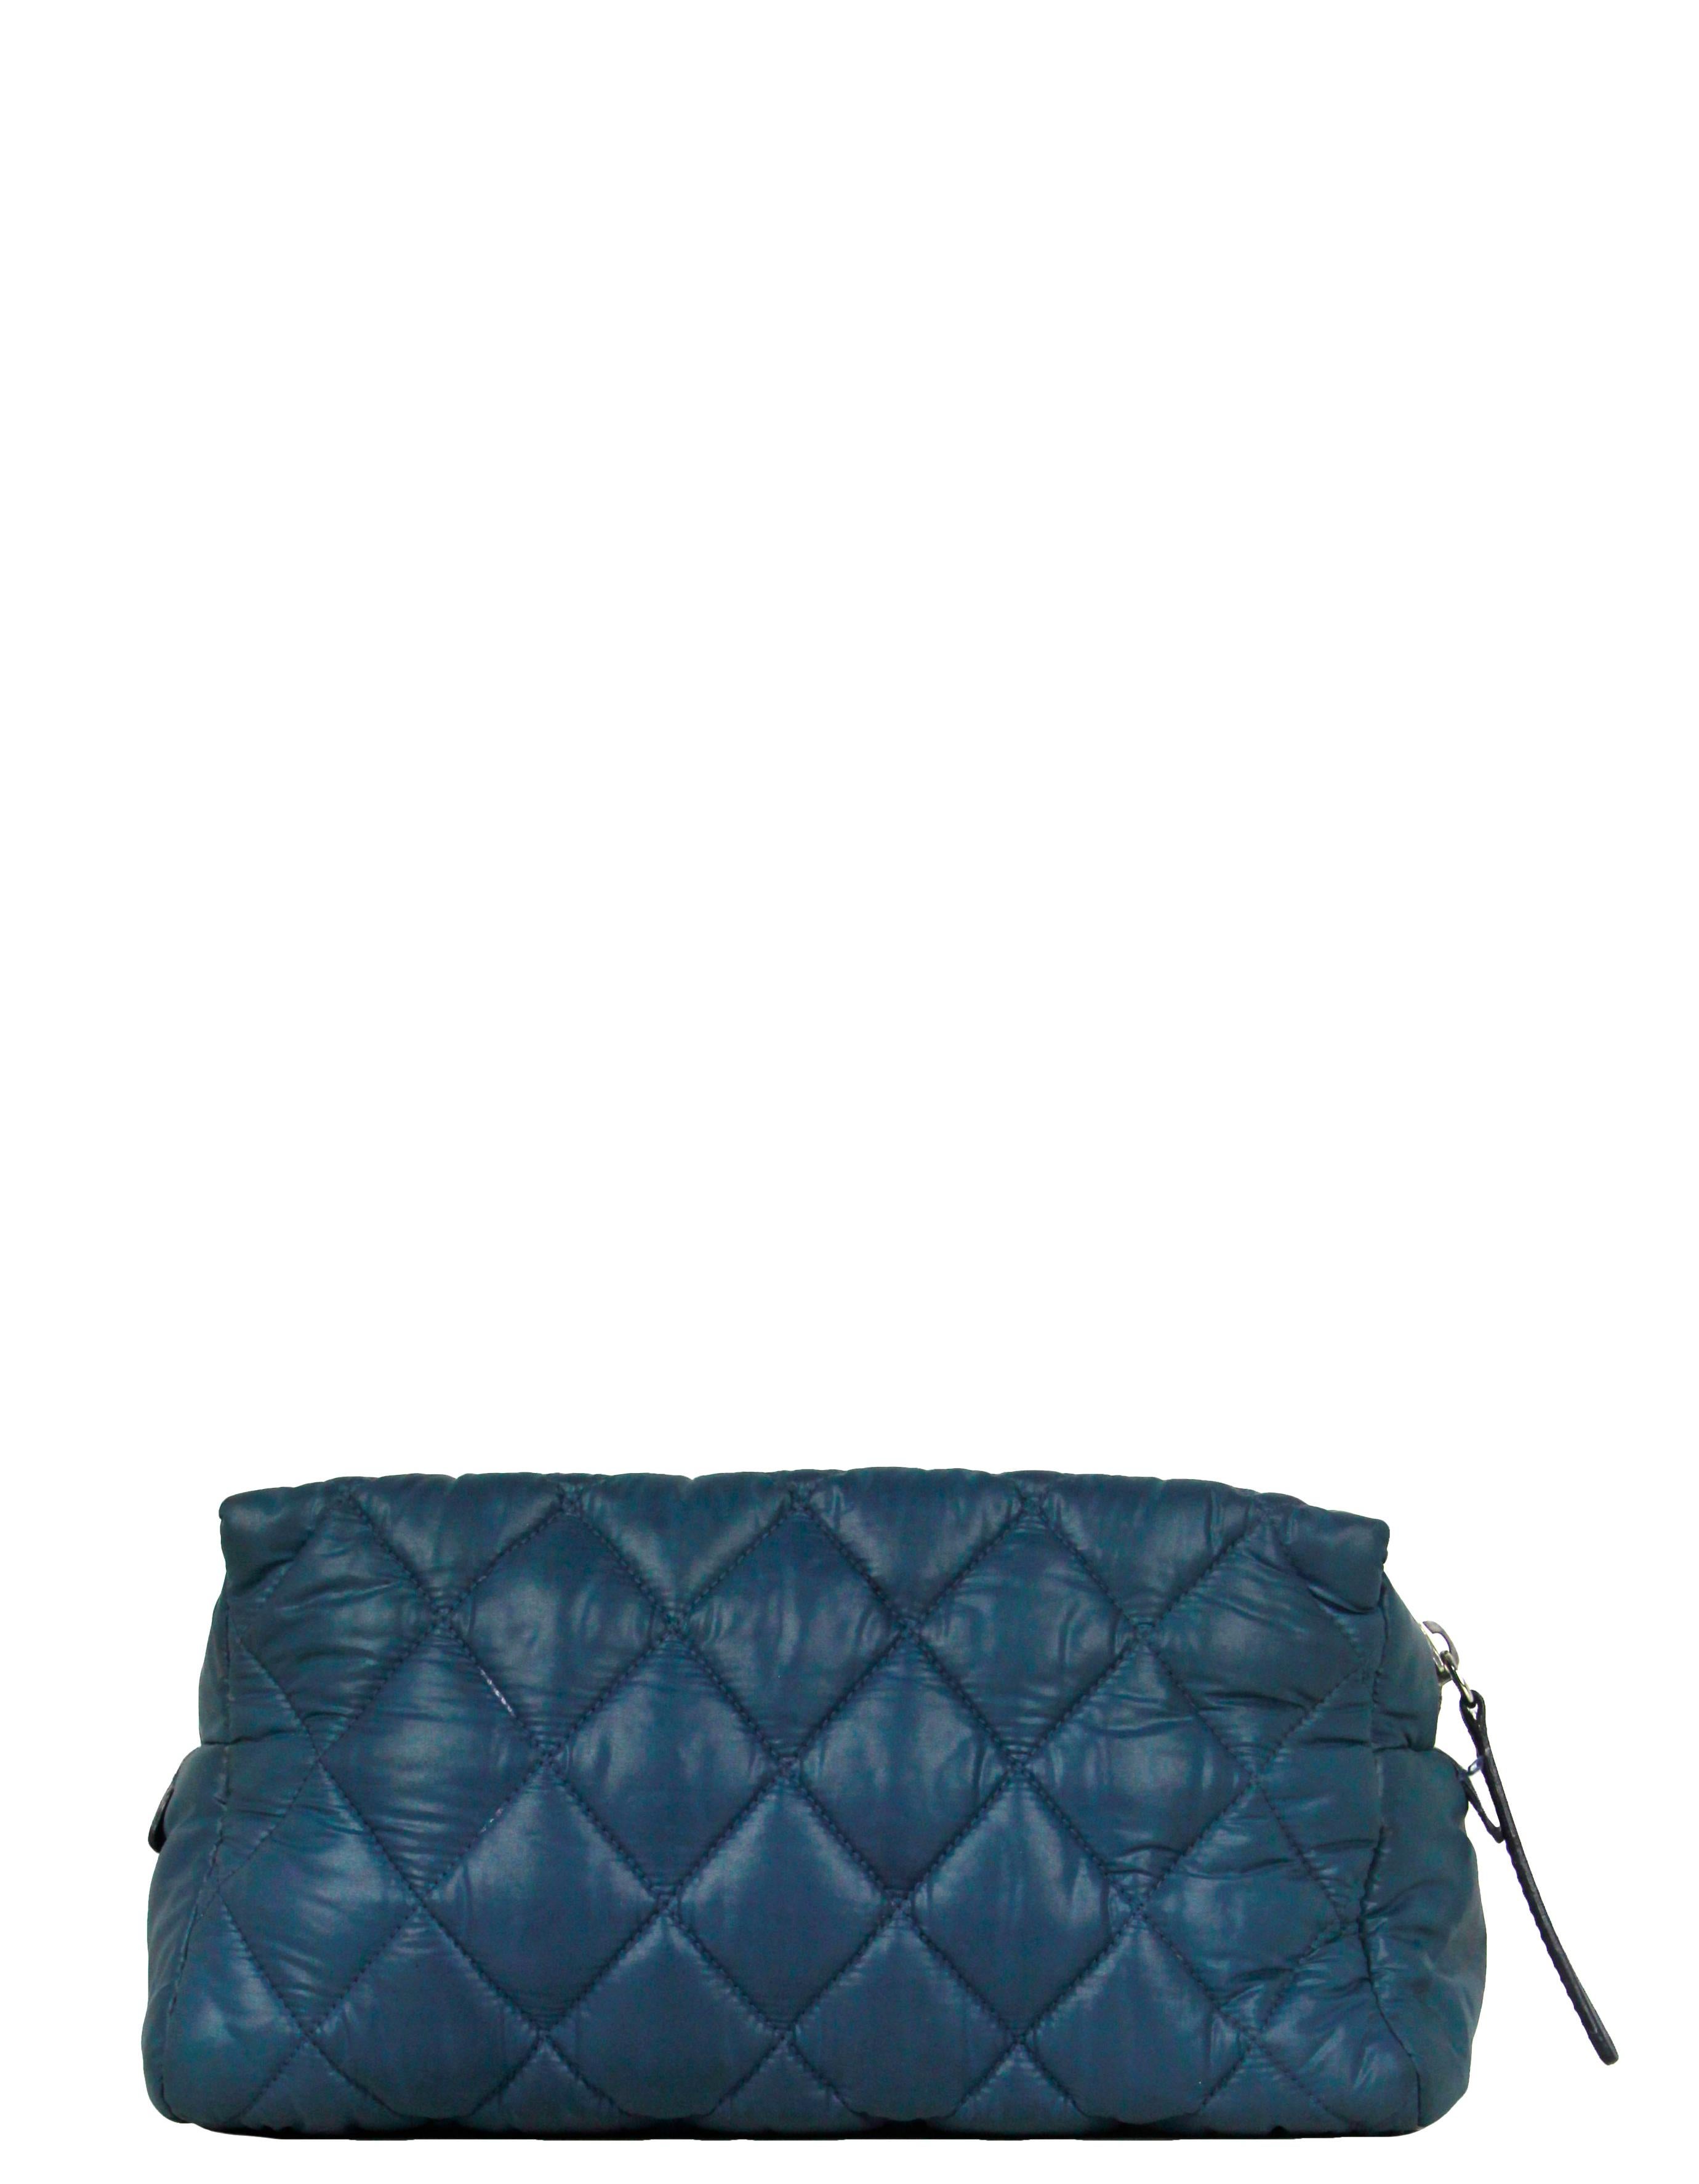 Chanel Blue Nylon Quilted Coco Cocoon Cosmetic Bag

Made In: Italy
Year of Production: 2009-2010
Color: Blue
Hardware: Silvertone
Materials: Nylon with leather trim
Lining: Black nylon
Closure/Opening: Zip top
Exterior Pockets: Front zip 
Interior